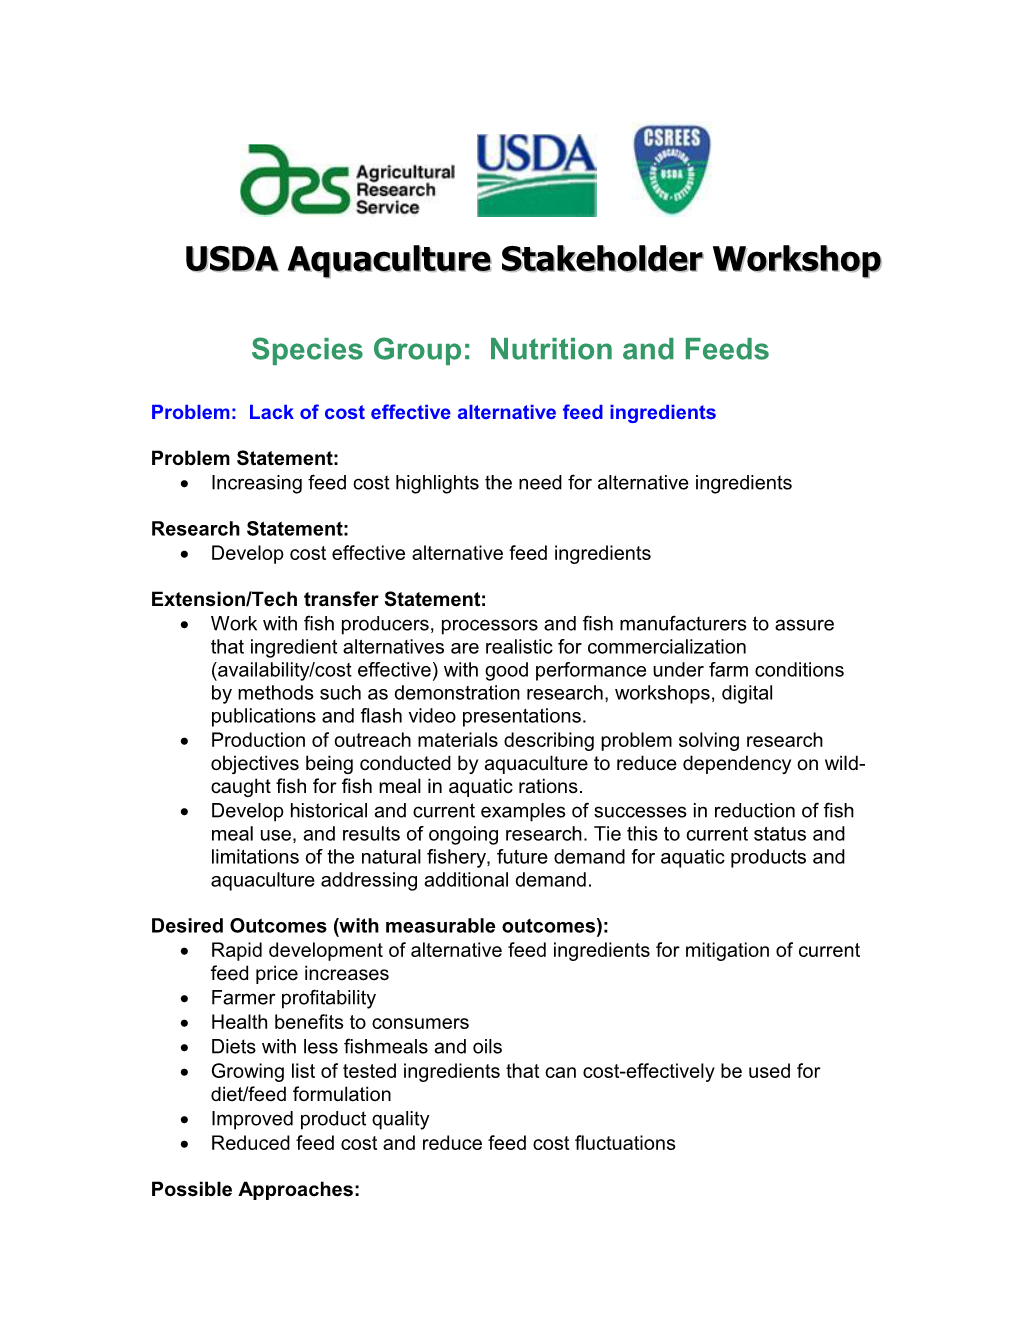 Species Group: Nutrition and Feeds